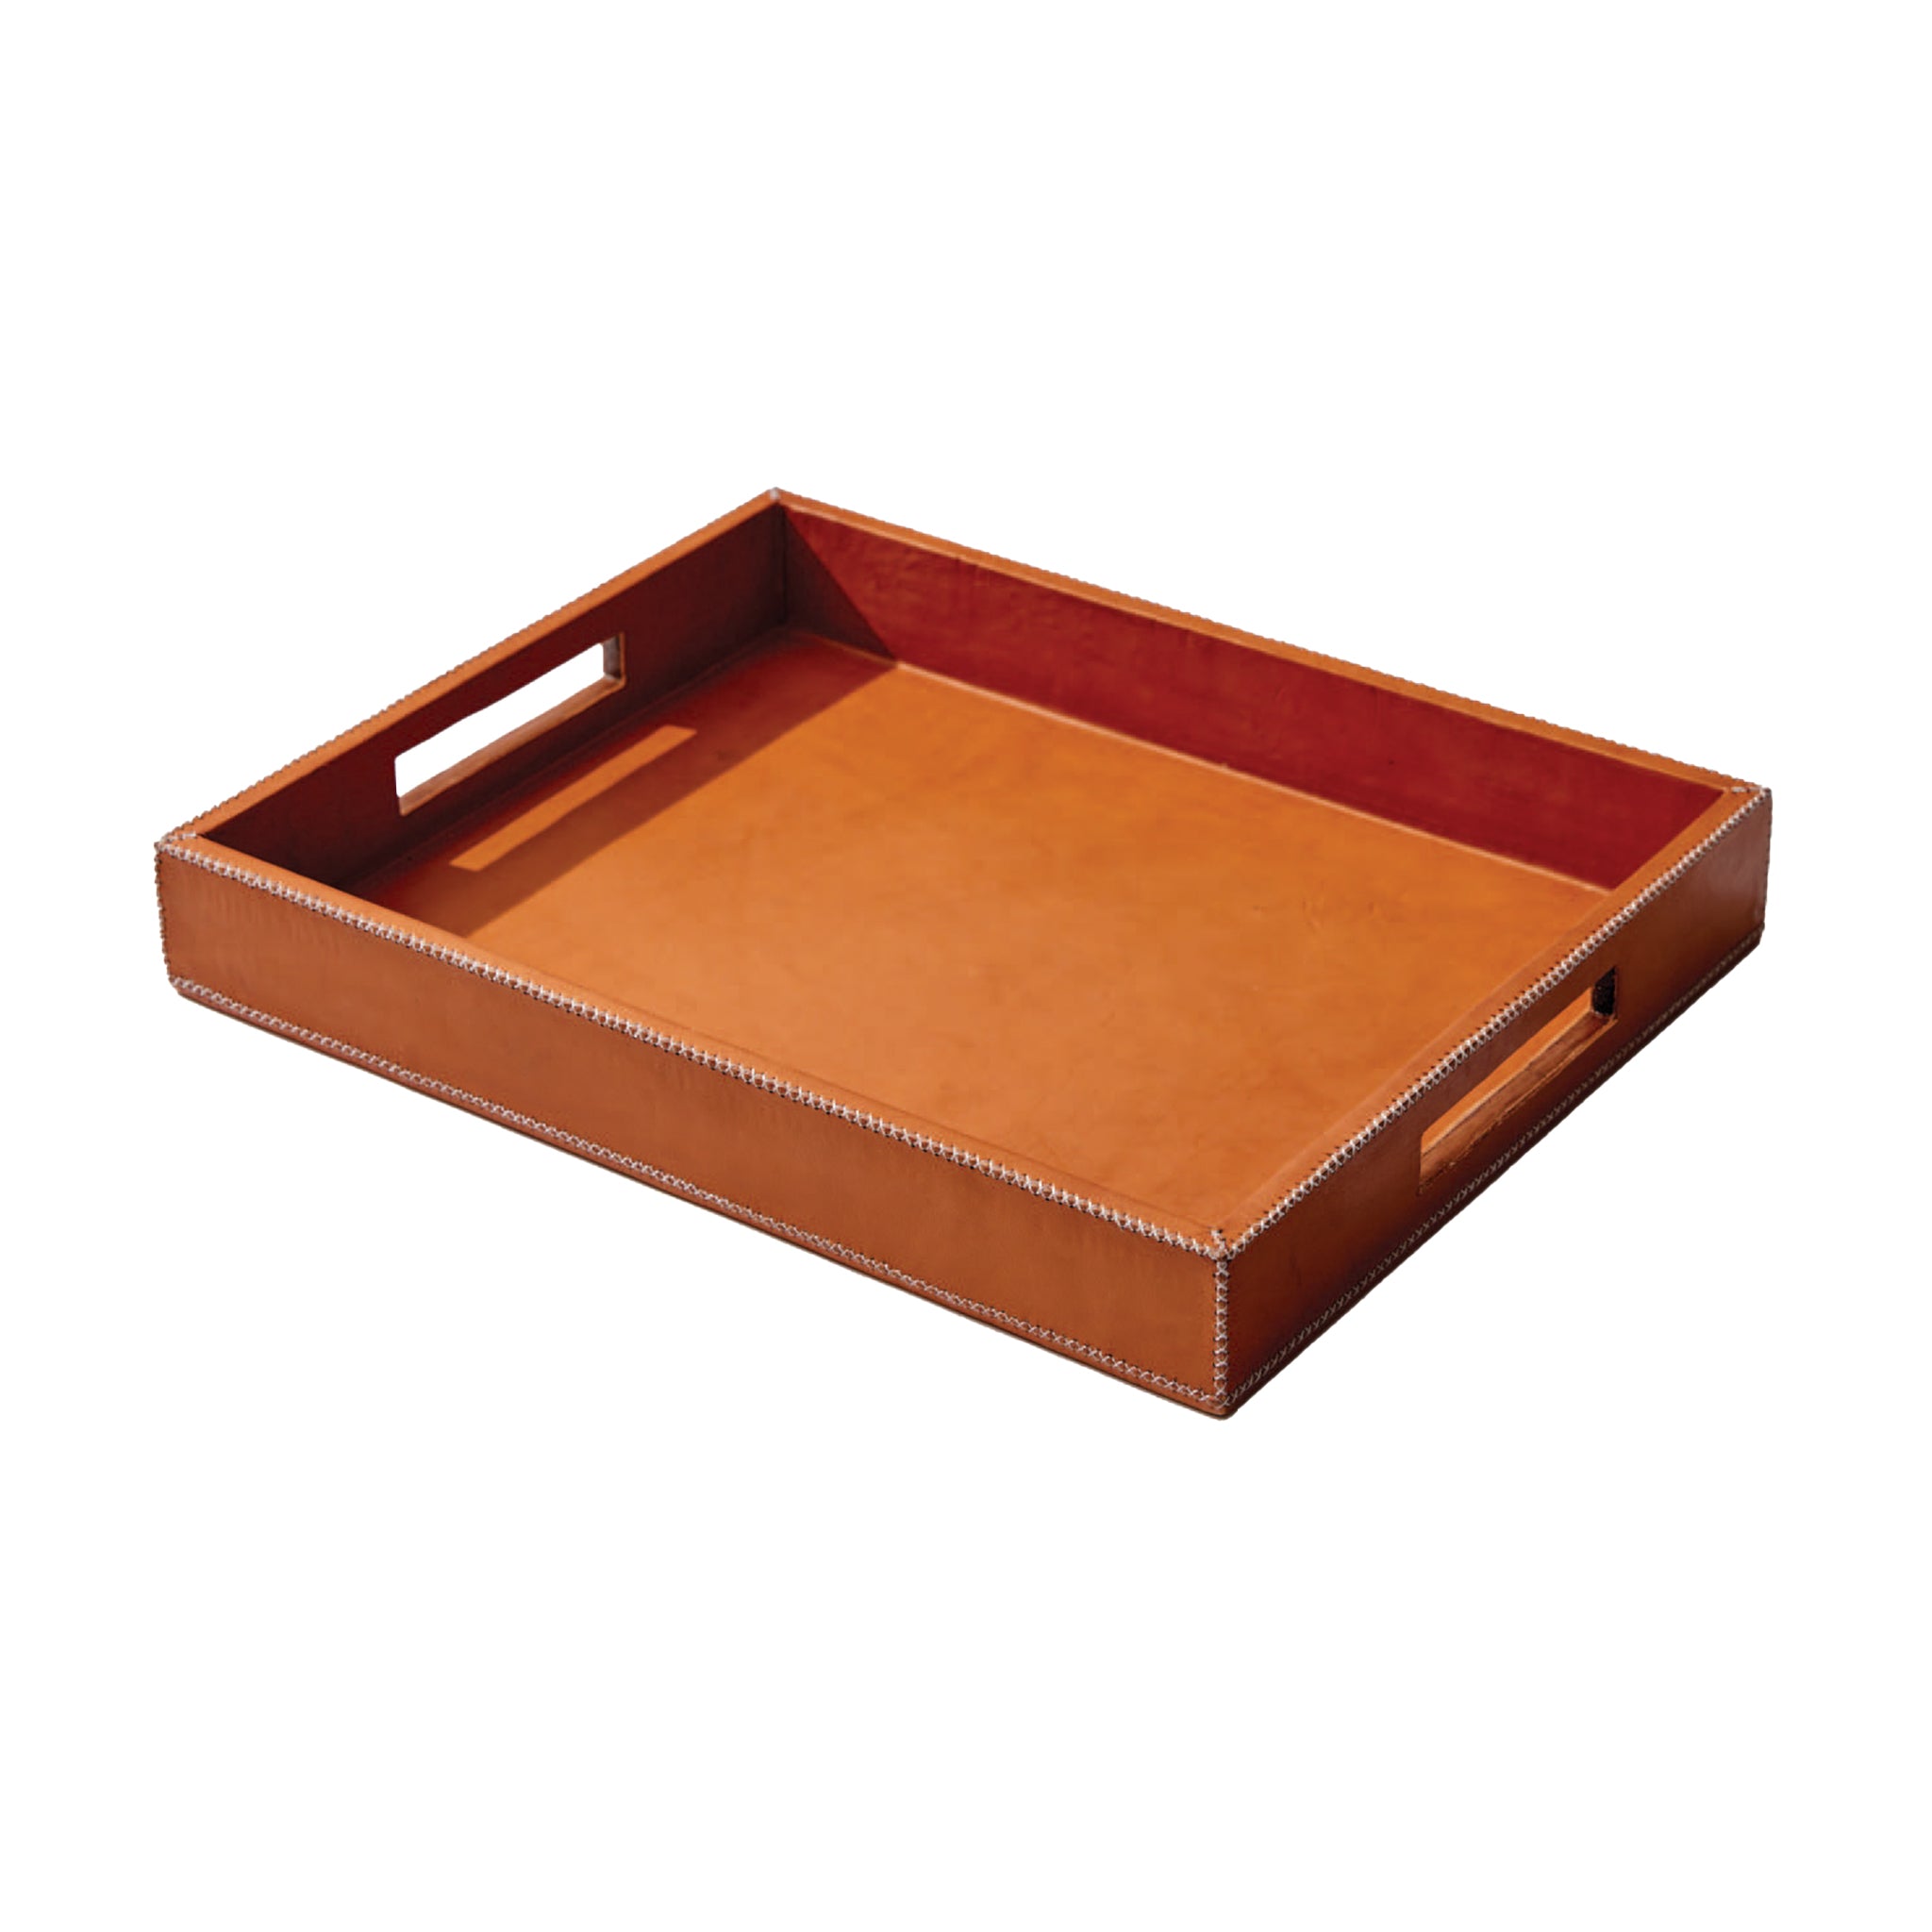 A large tan leather tray with handles on a white background